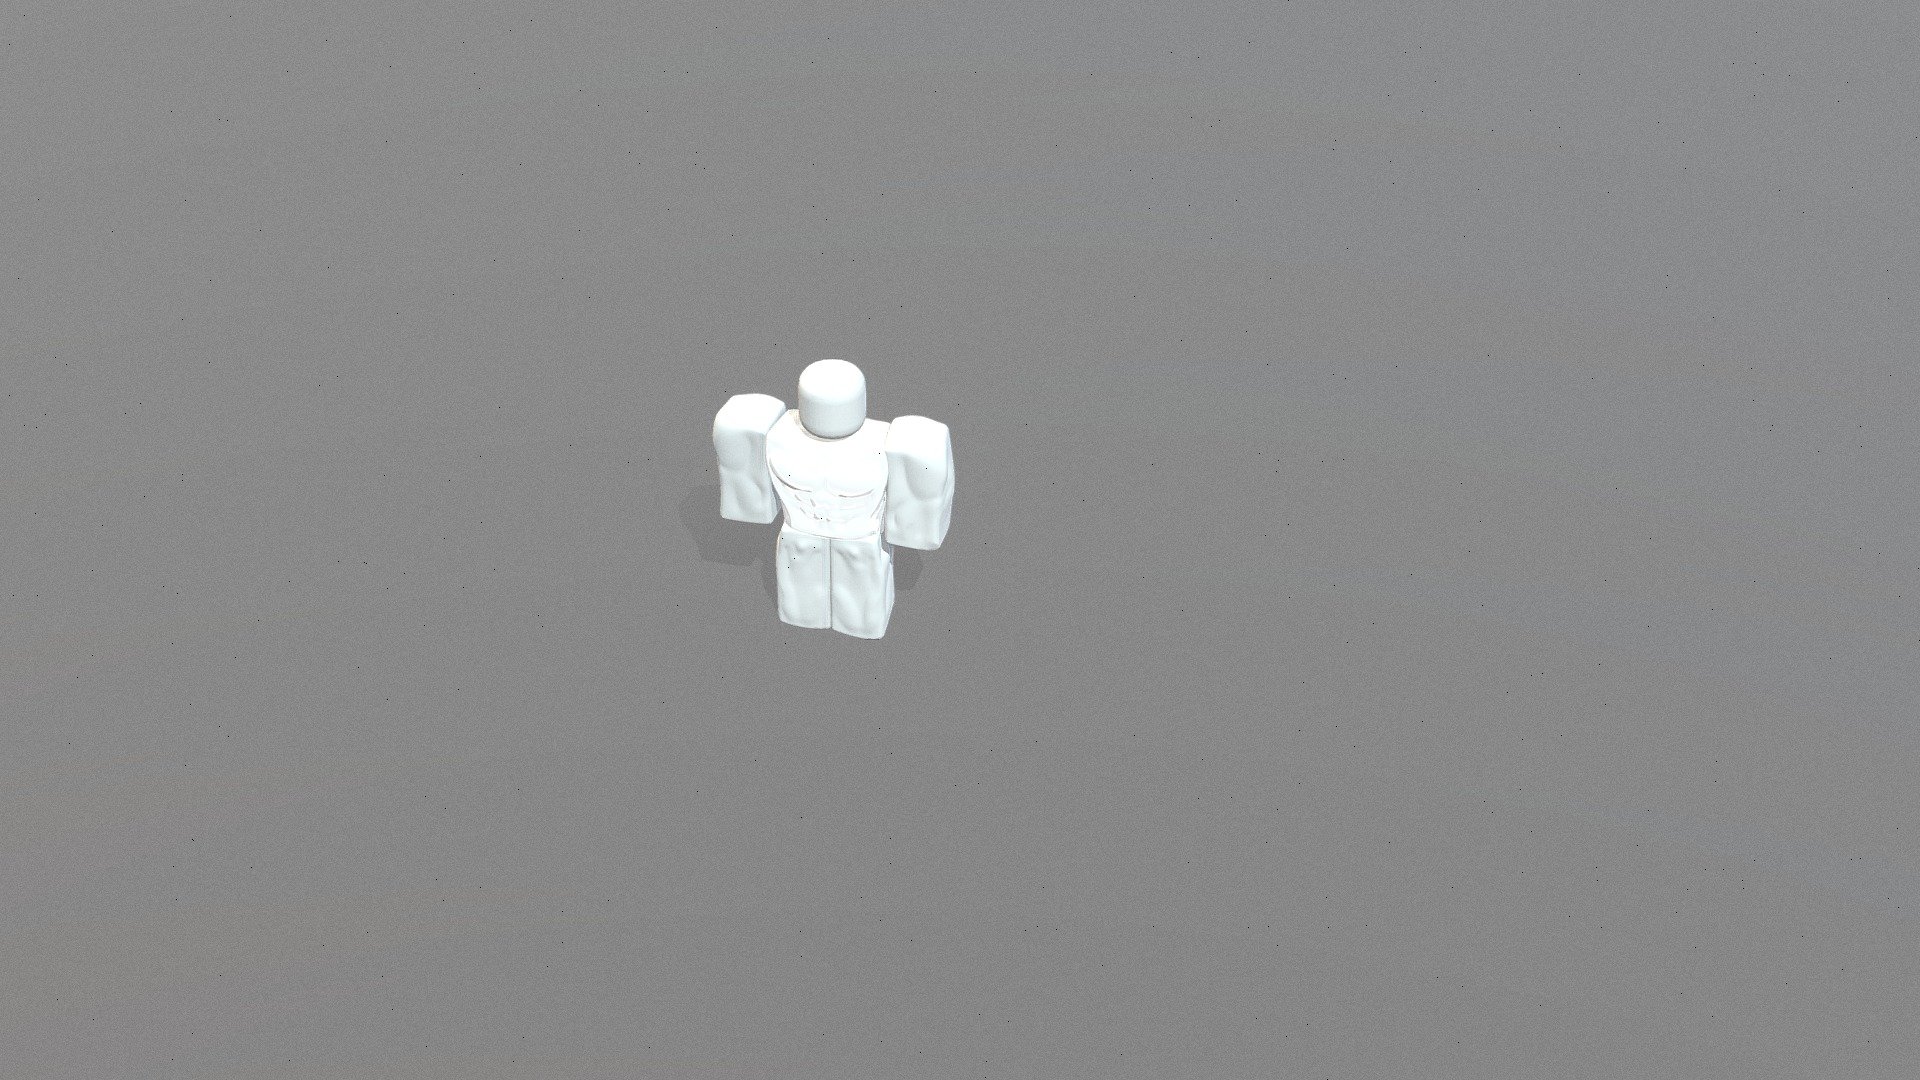 MuscleBody - Roblox